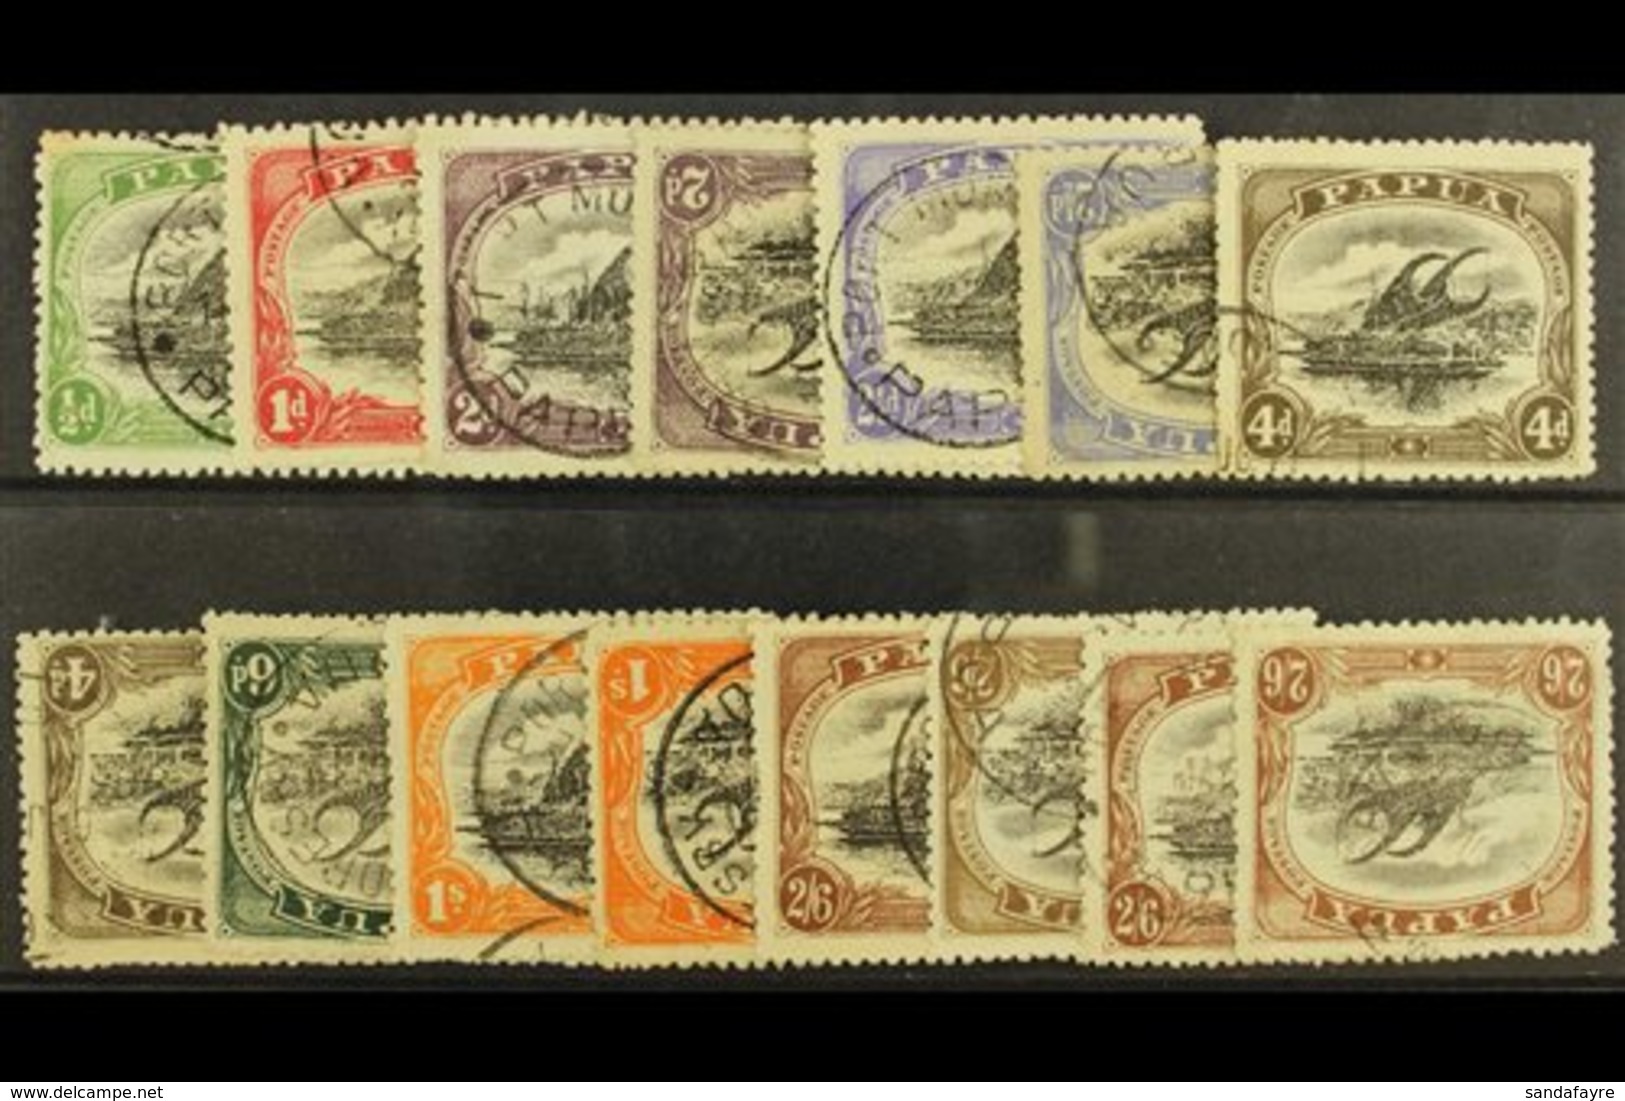 1910-11 Lakatoi Litho Set, SG 75/83 With Both 2s6d Types, With Additional Inverted Watermarks Of 2d, 2½d, 4d, 1s, 2s6d T - Papúa Nueva Guinea